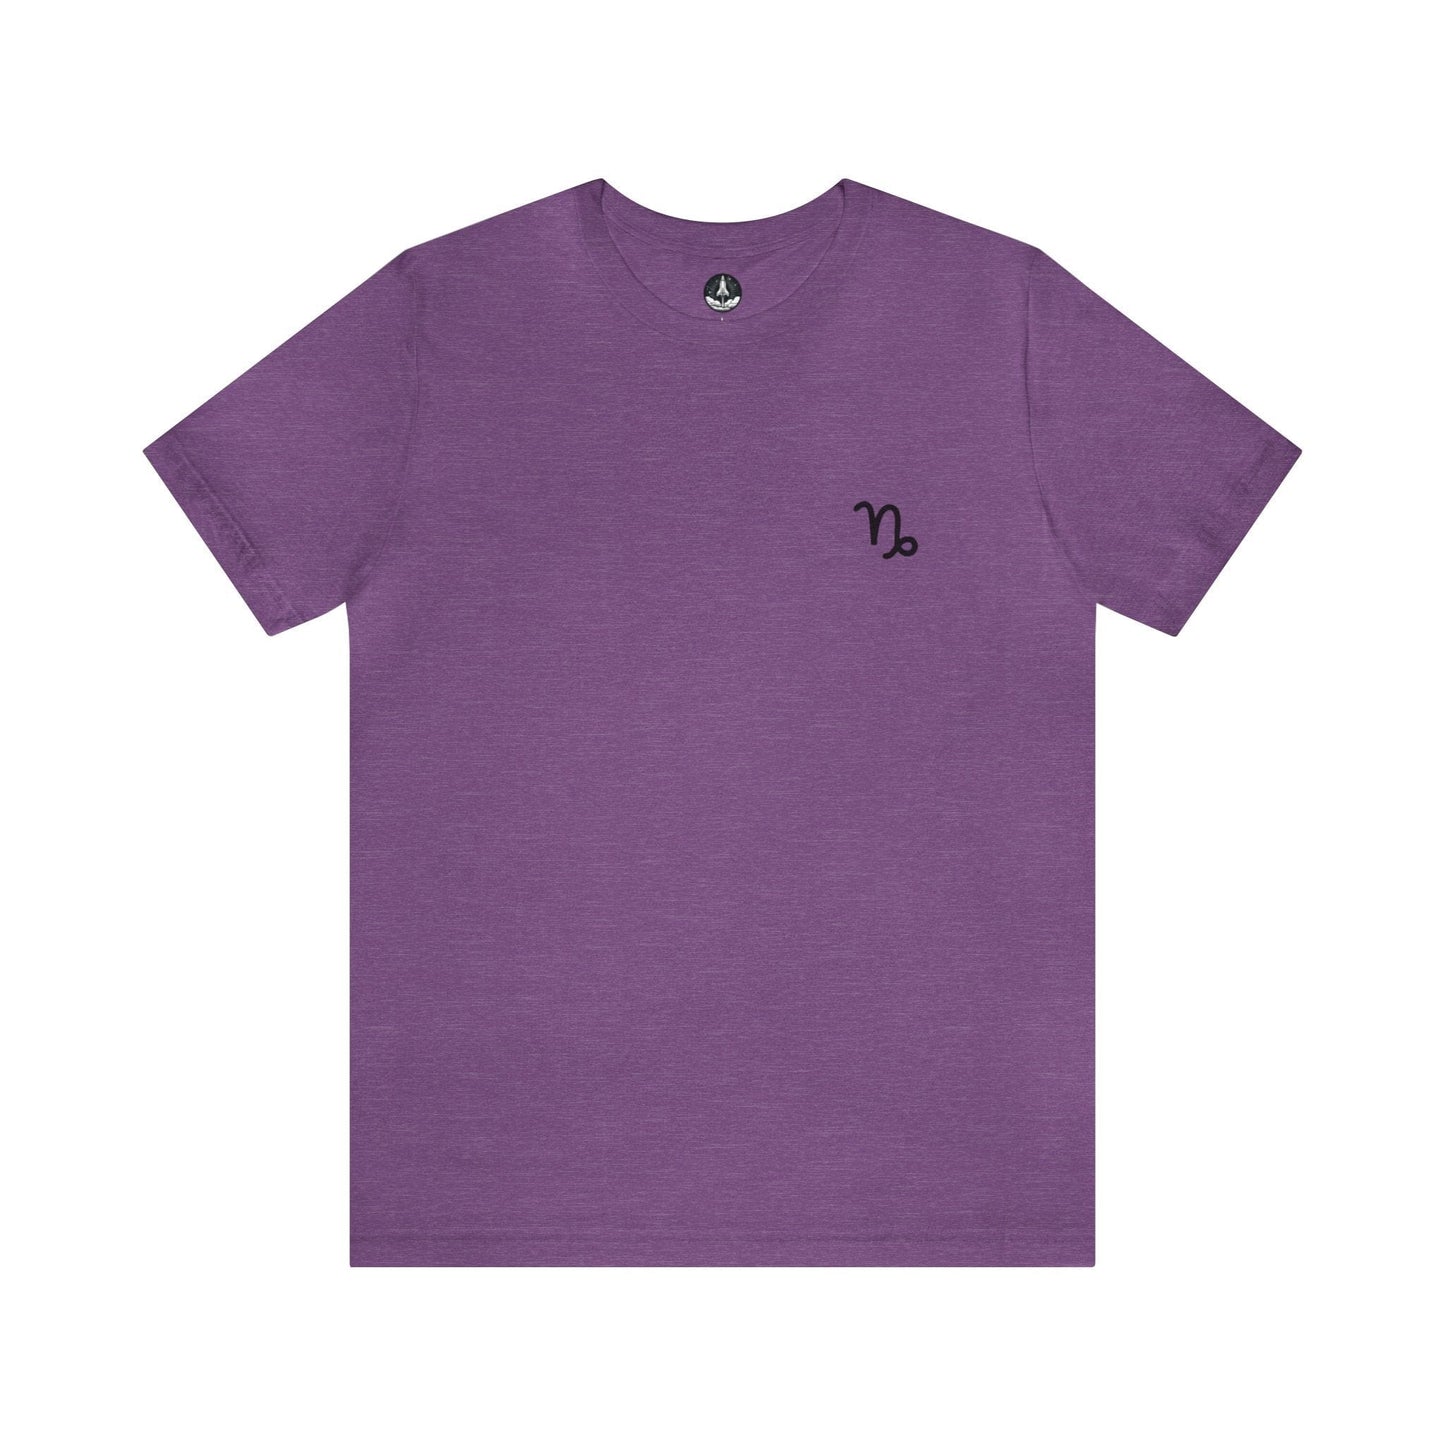 T-Shirt Heather Team Purple / S Capricorn Mountain Glyph T-Shirt: Peak Style for the Determined Climber